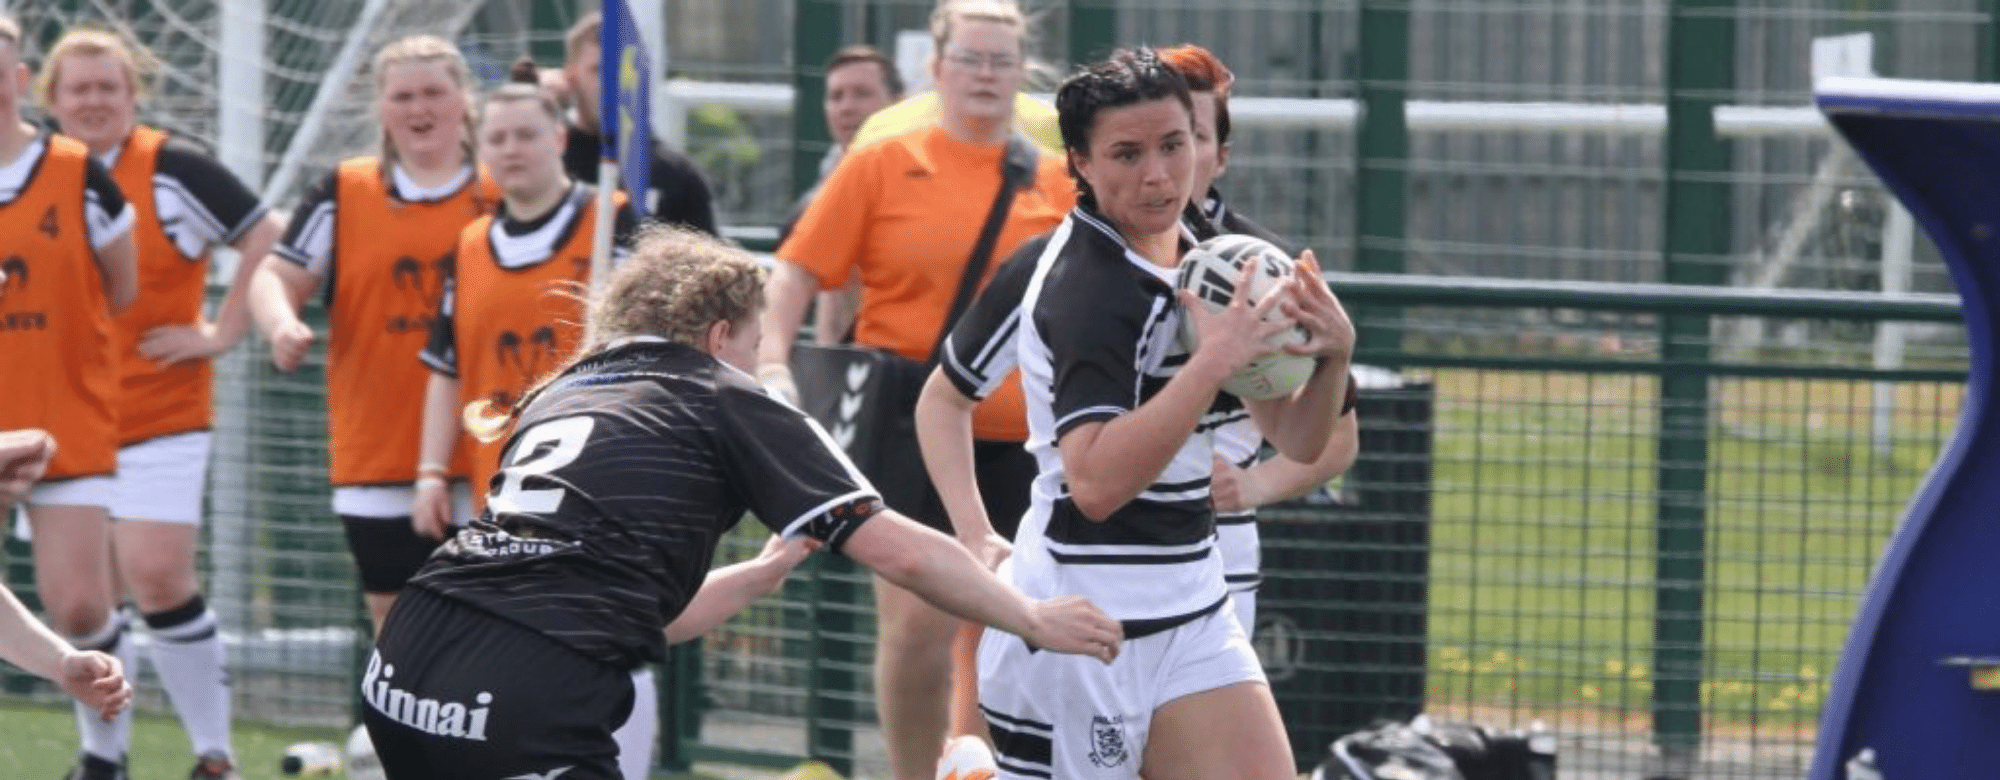 2022 Fixtures Confirmed For Hull FC Women’s Side